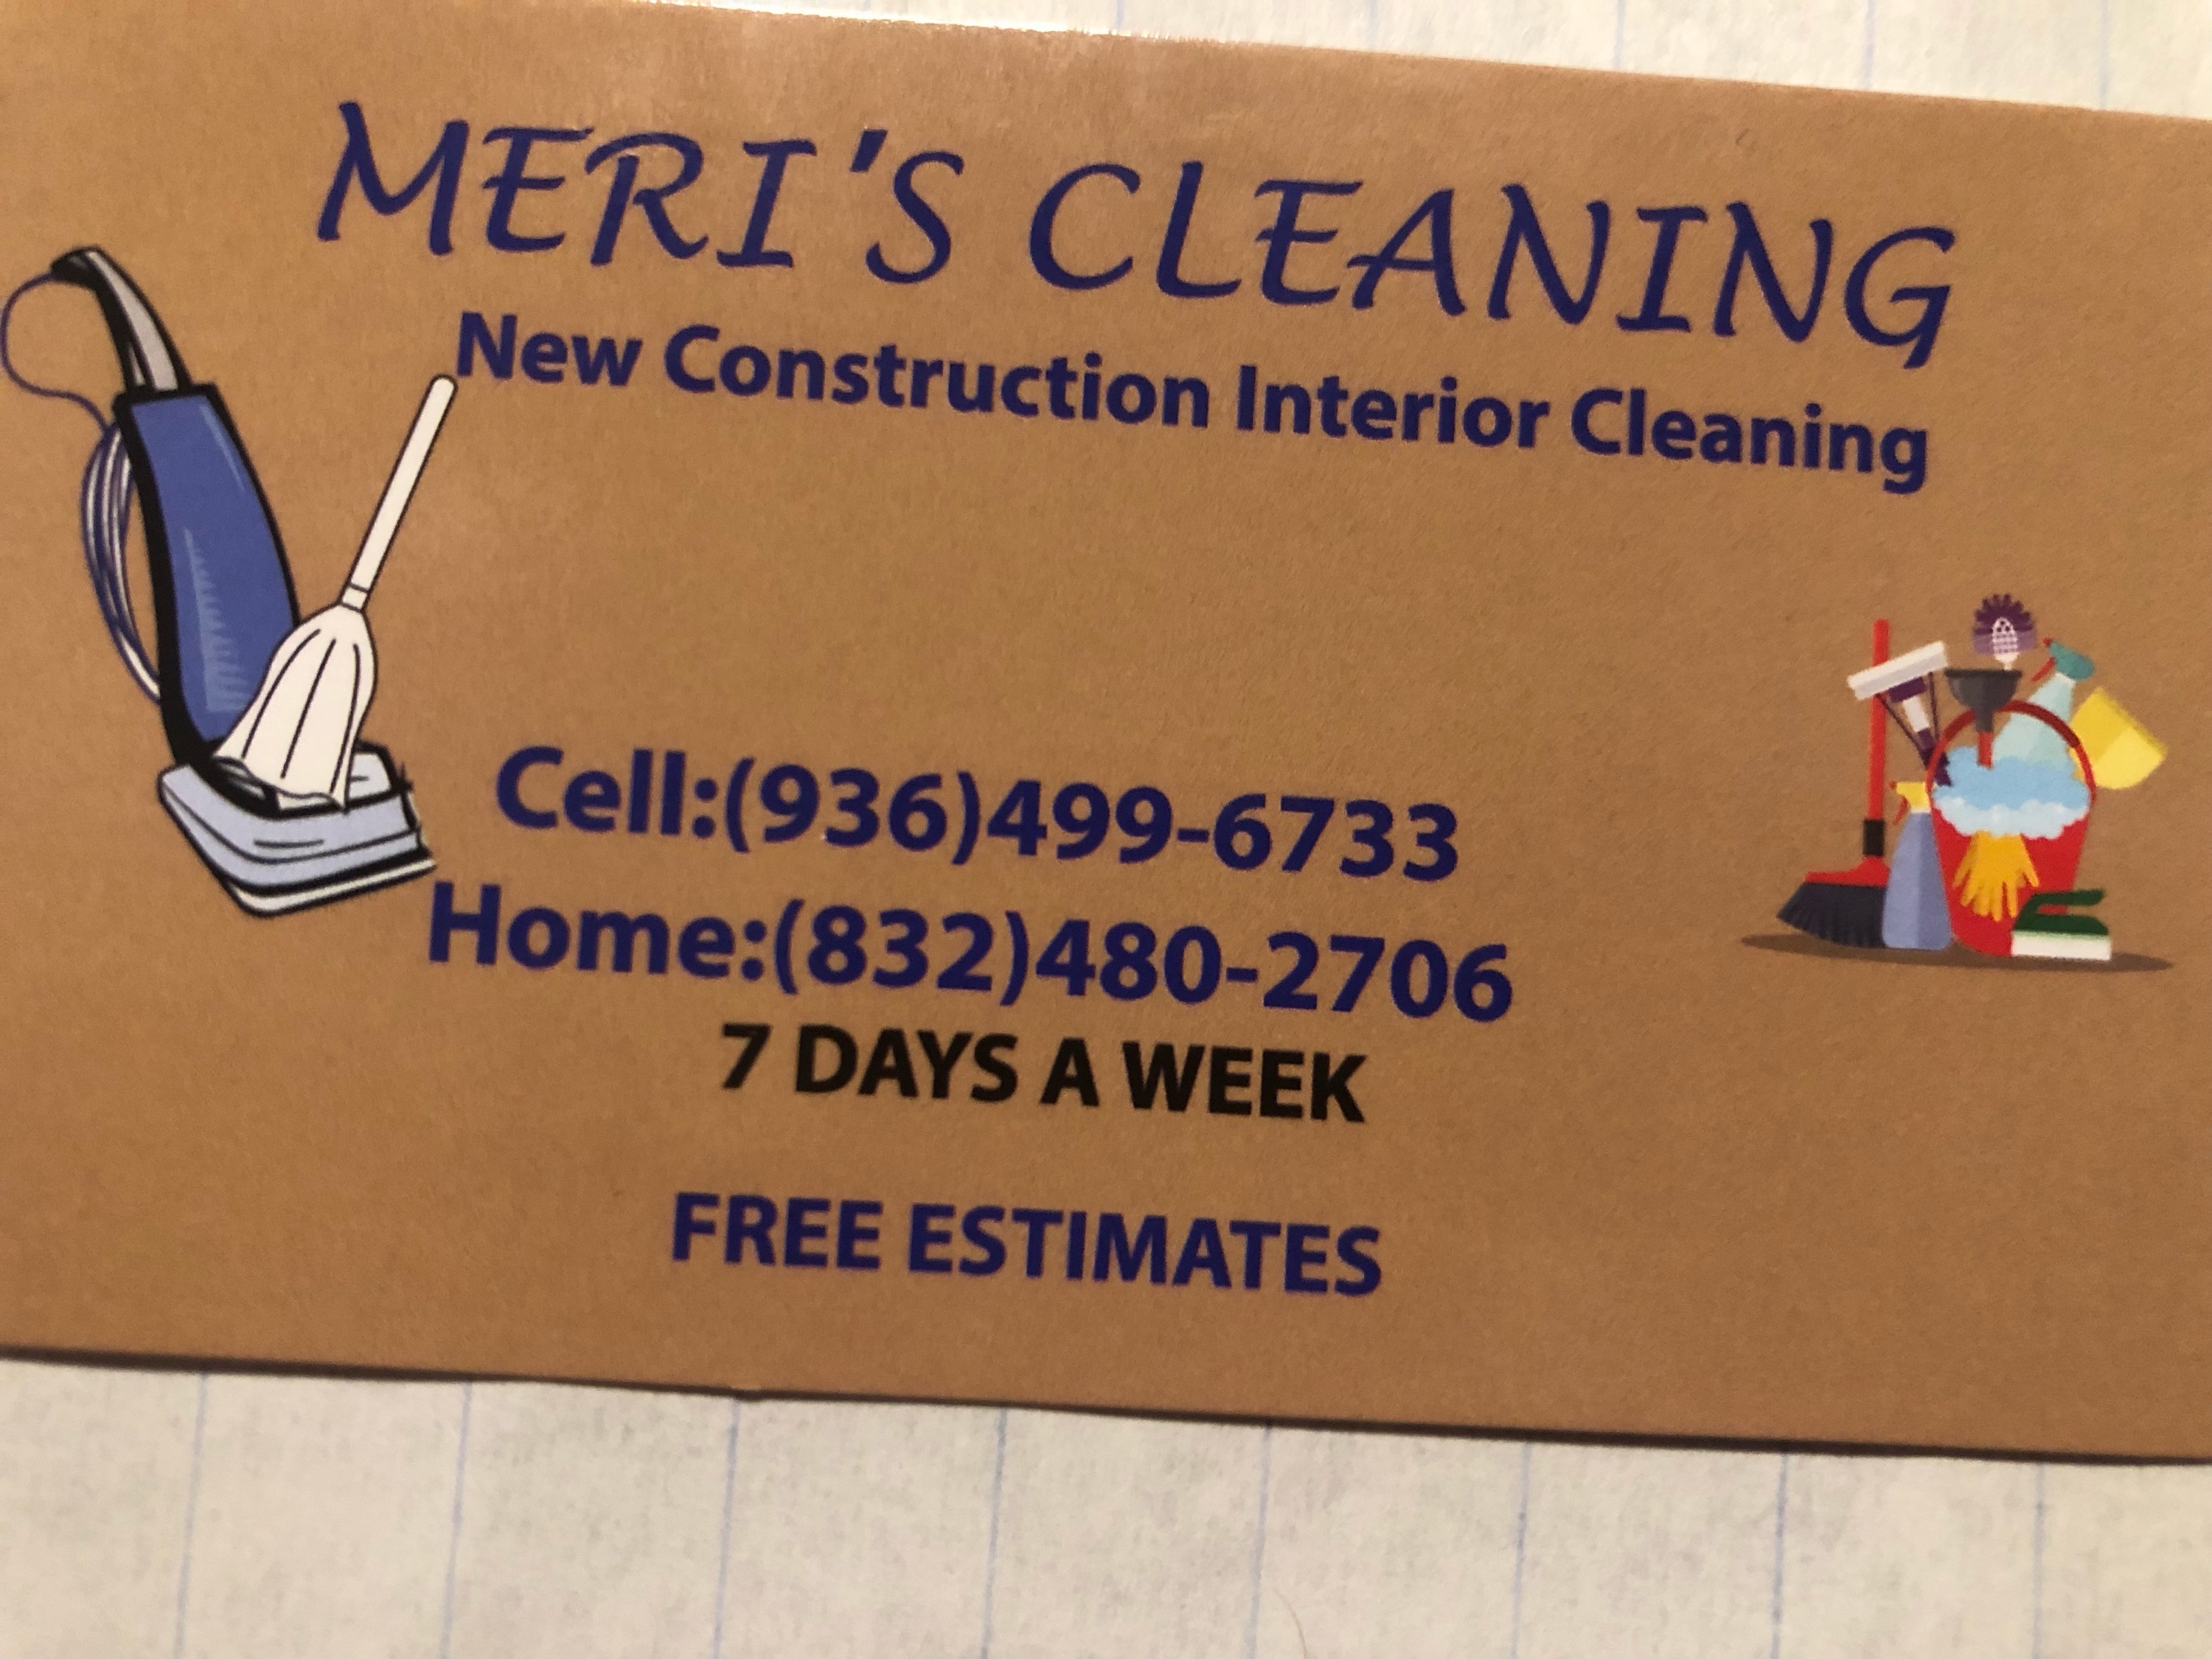 Mary's Cleaning Service Logo